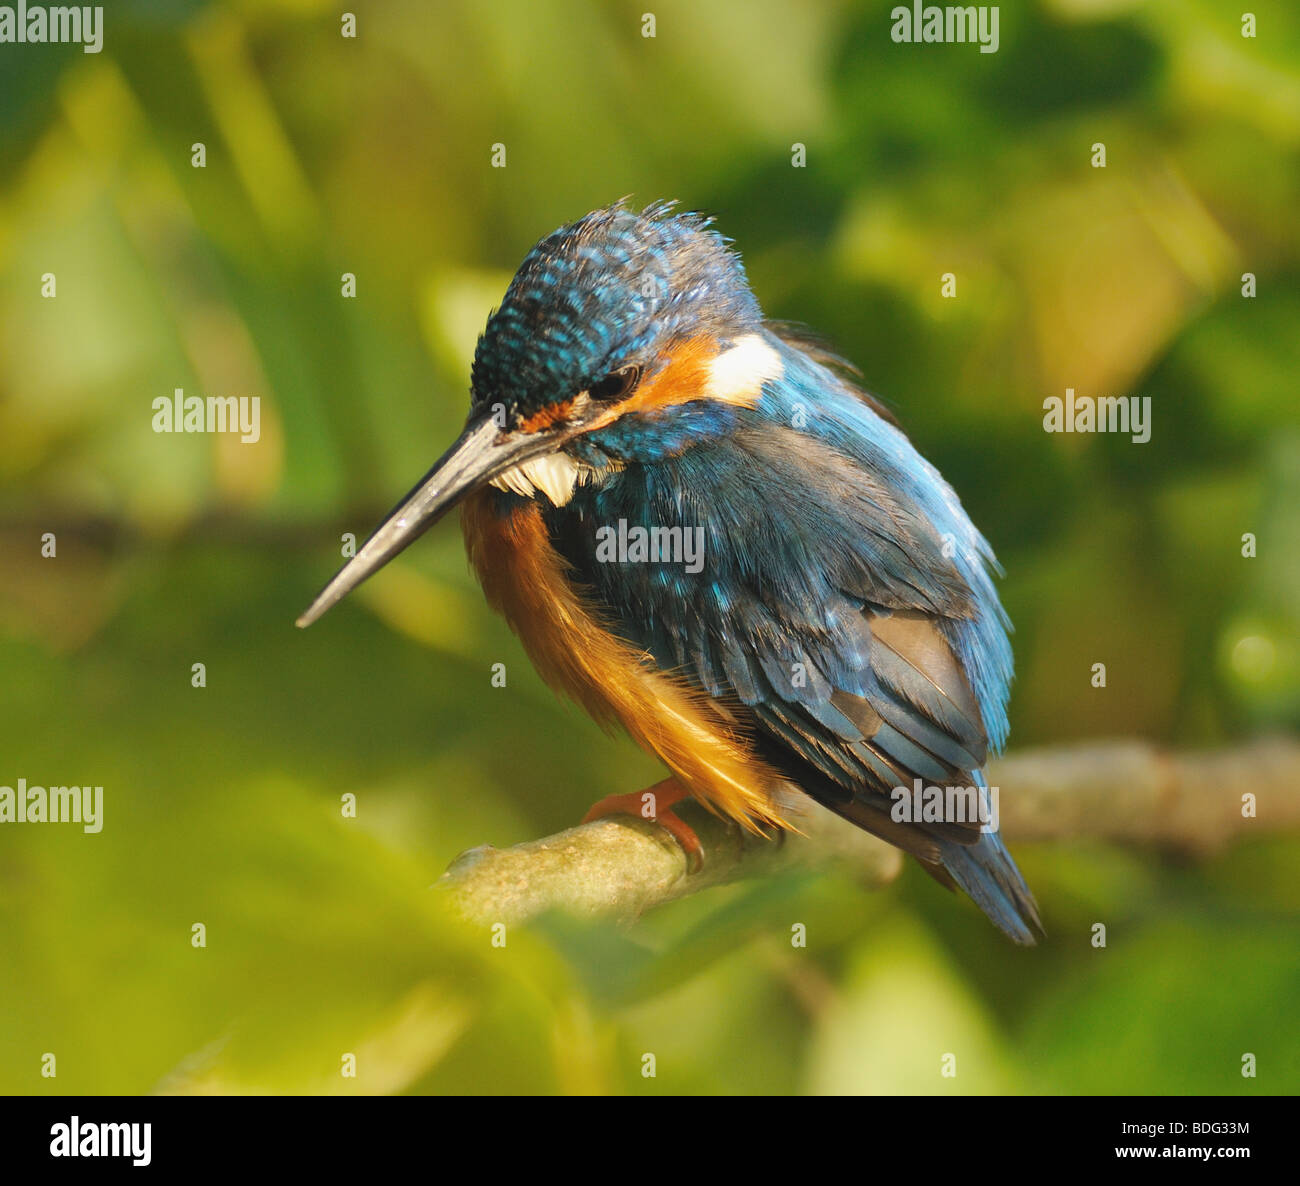 King Fisher bird sitting on a tree branch Stock Photo